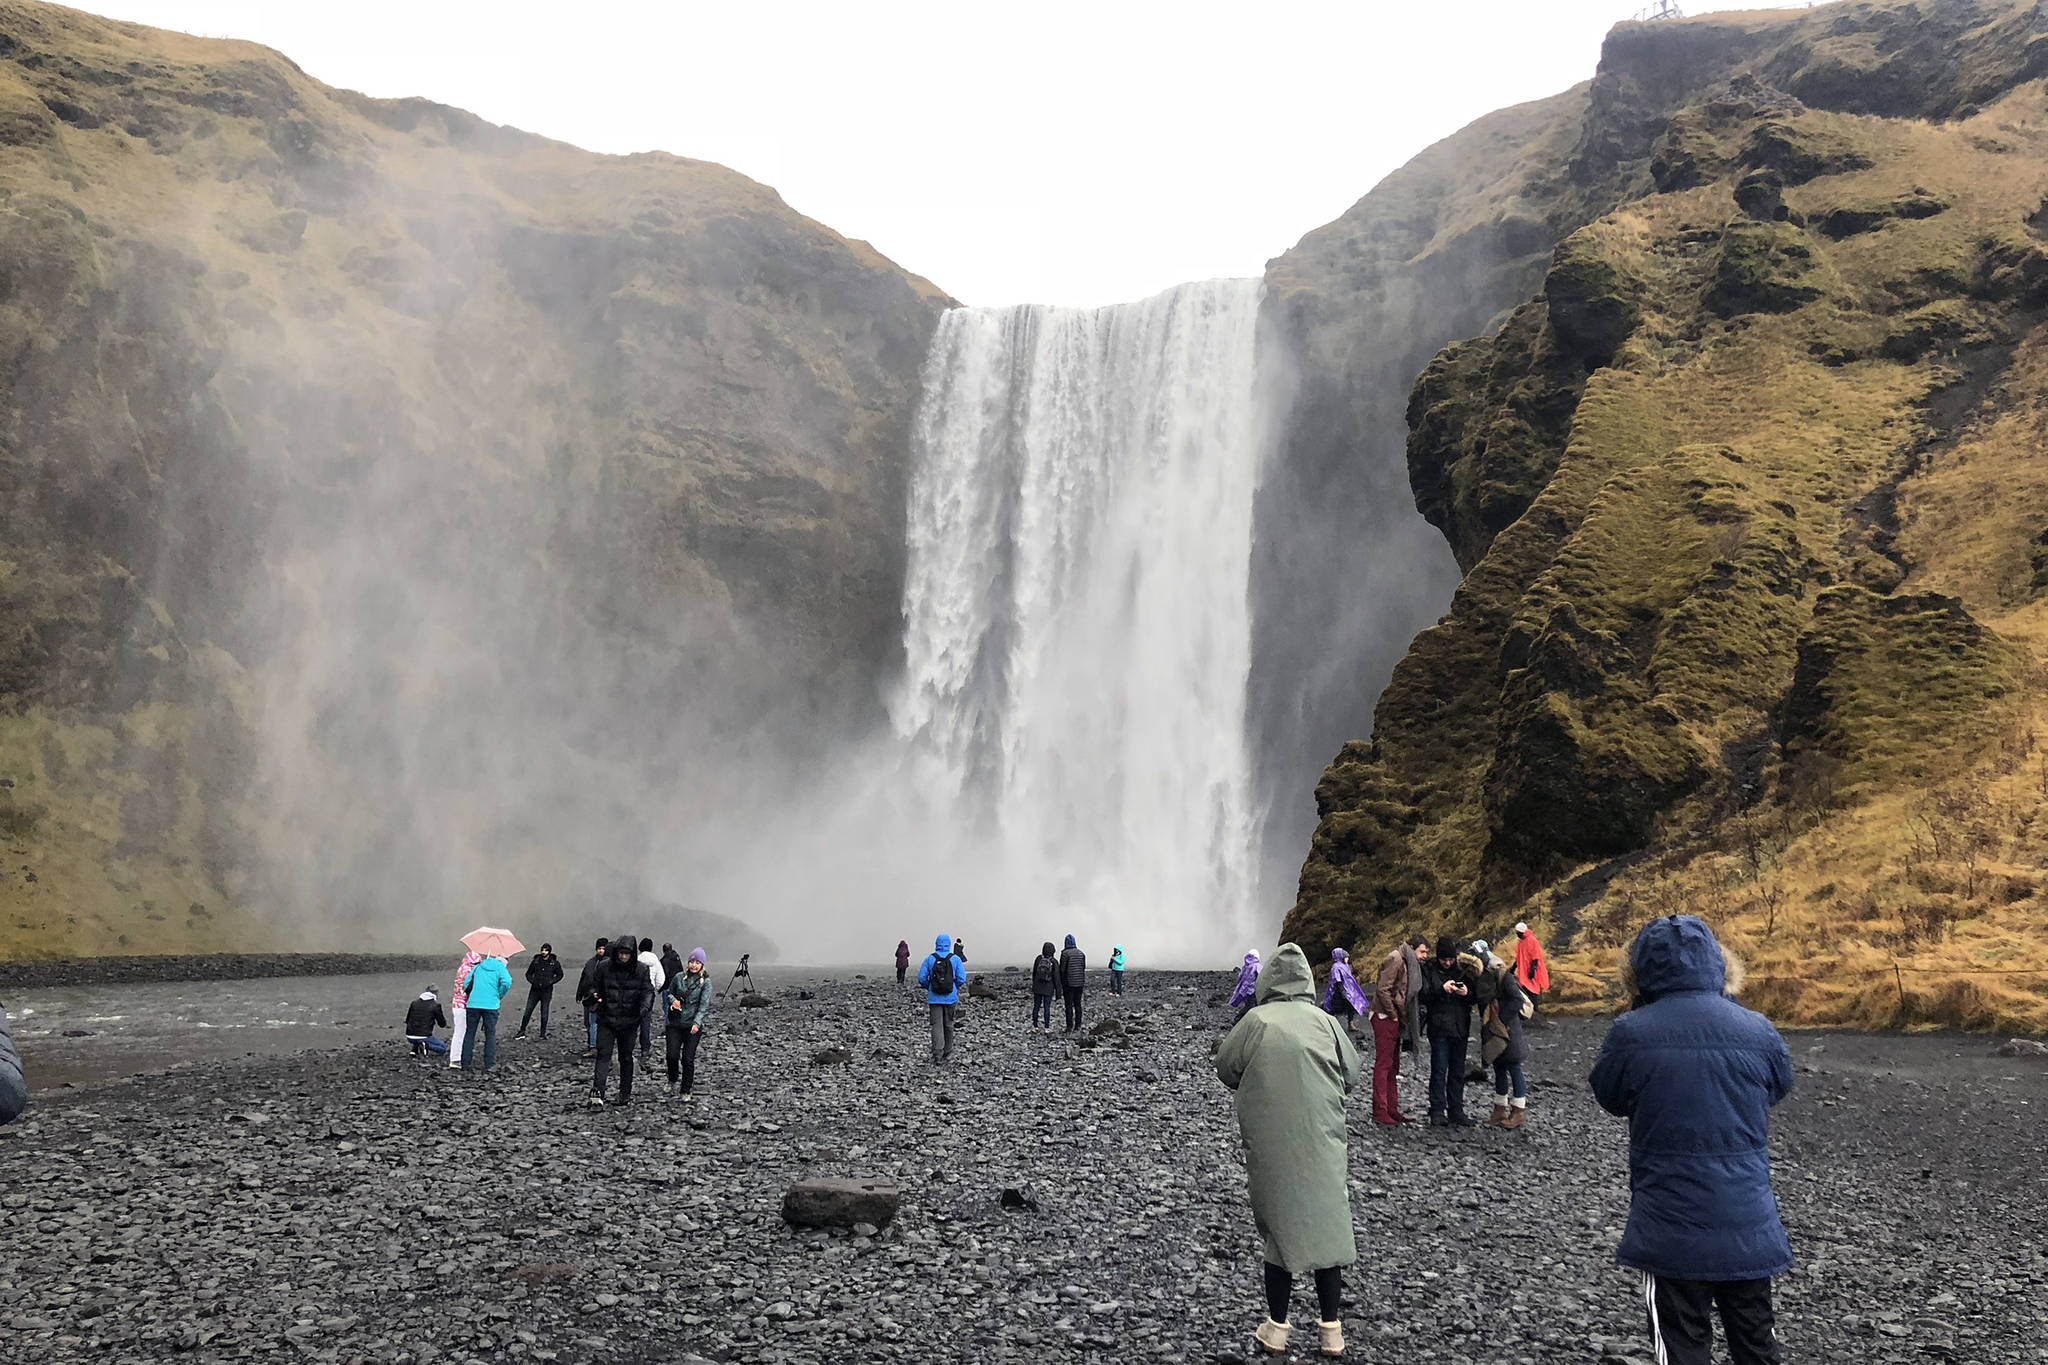 Iceland tourism manager to share advice at Innovation Summit